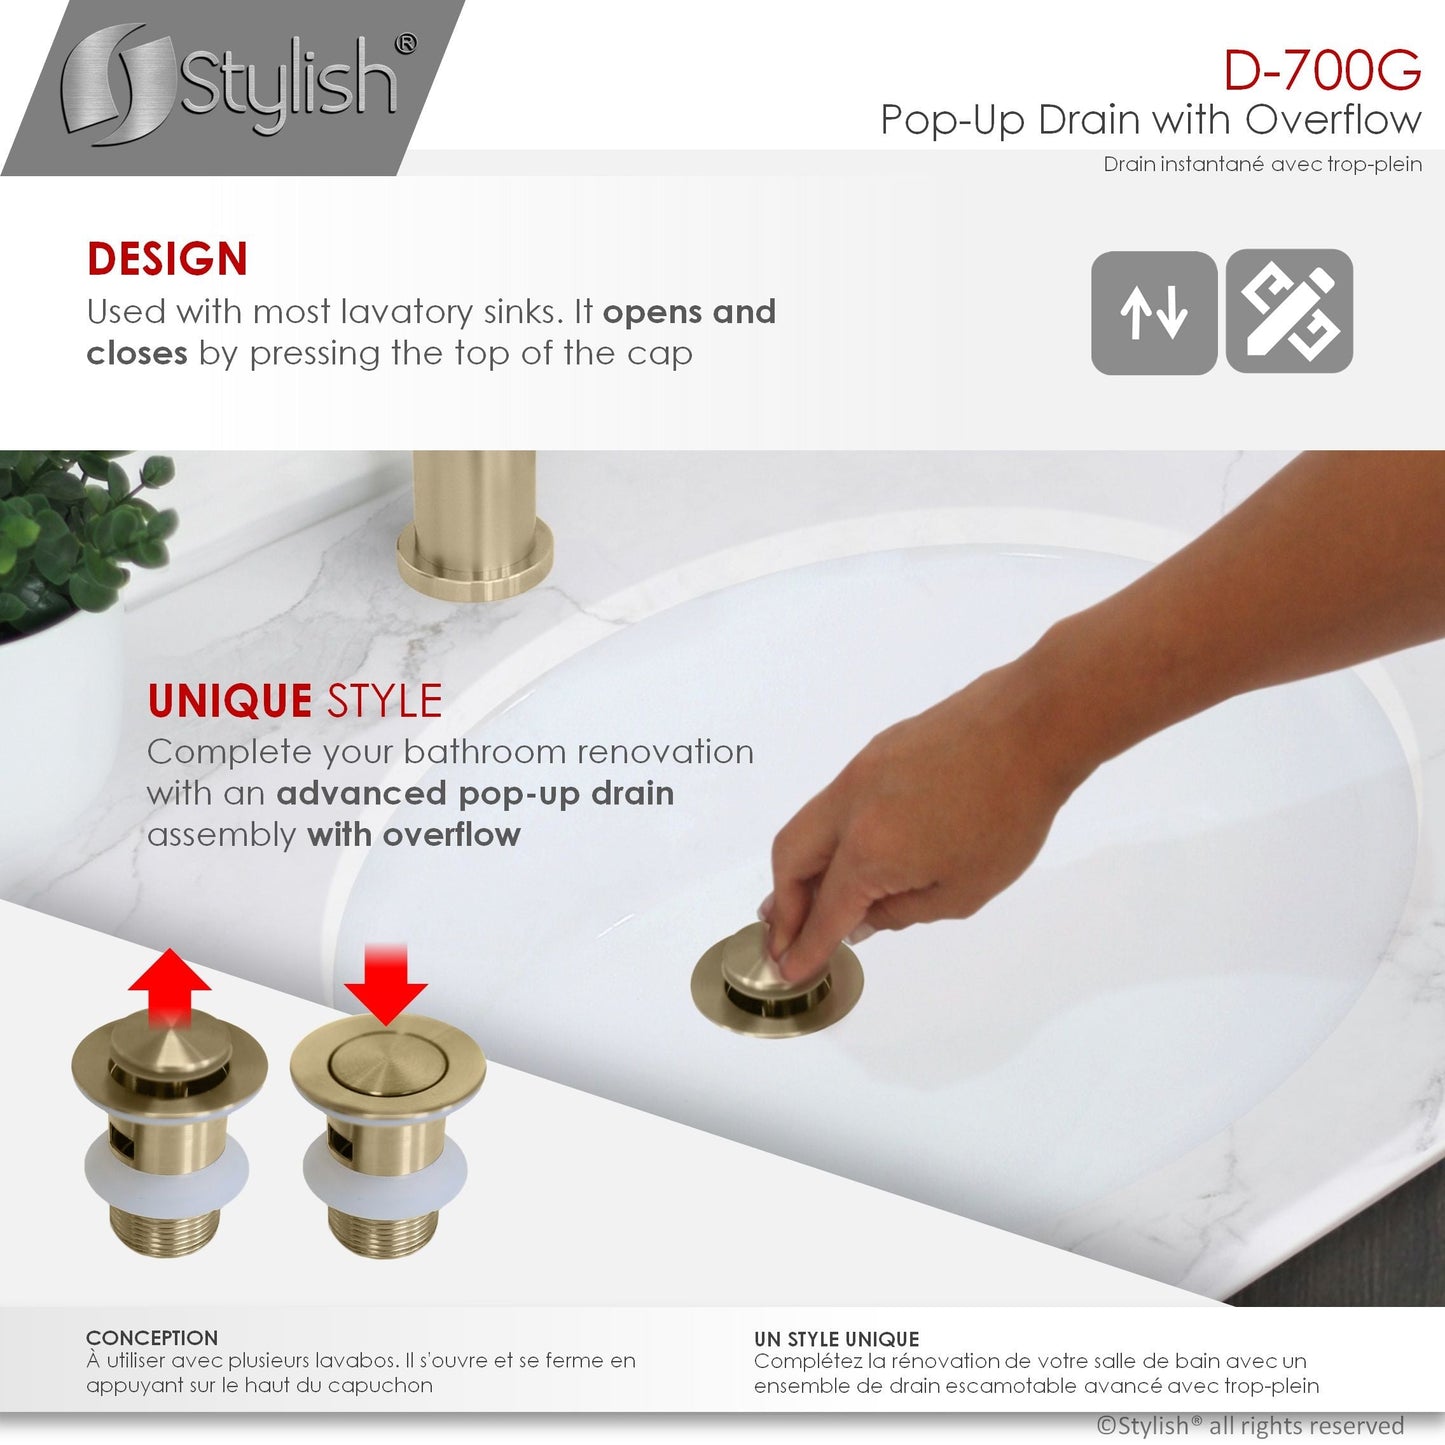 Stylish Stainless Steel Bathroom Sink Pop-Up Drain with Overflow D-700G